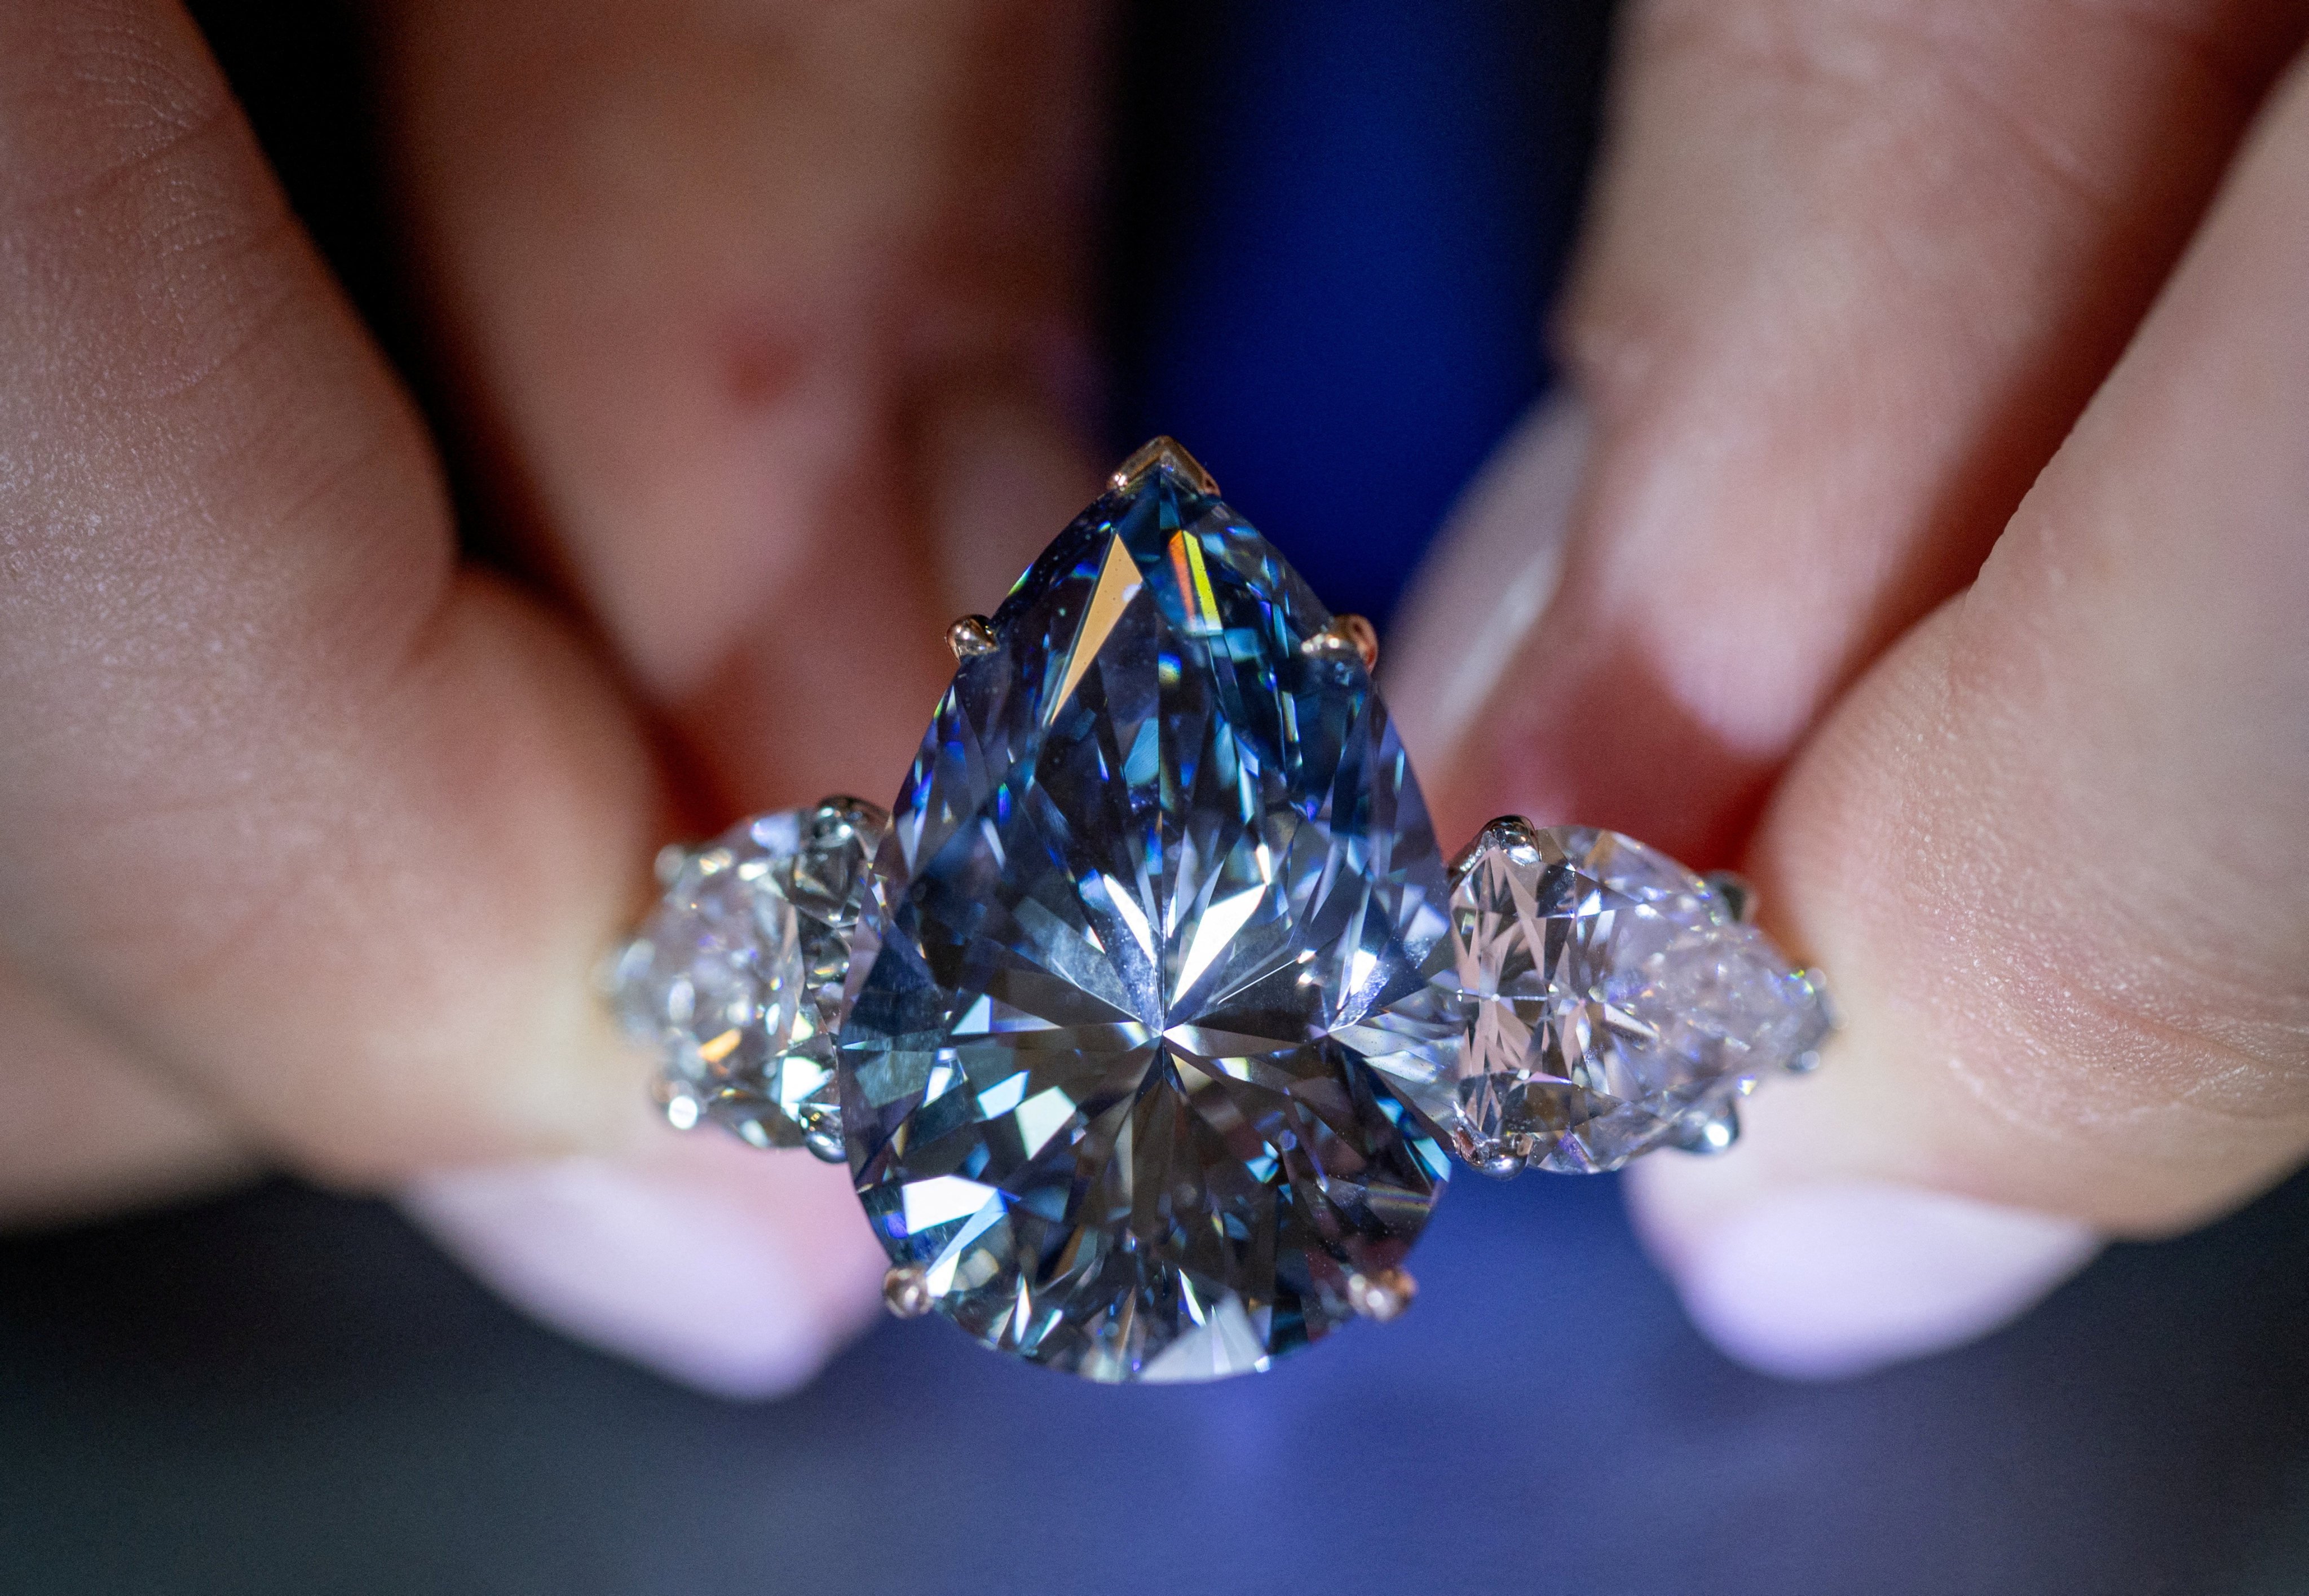 A Christie’s auction house staff member holds the Bleu Royal diamond, weighing 17.61 carats, which is the largest to appear for sale in auction history and that could sell for up to US$50 million, during an auction preview in Geneva, Switzerland, on November 1. Photo: Reuters